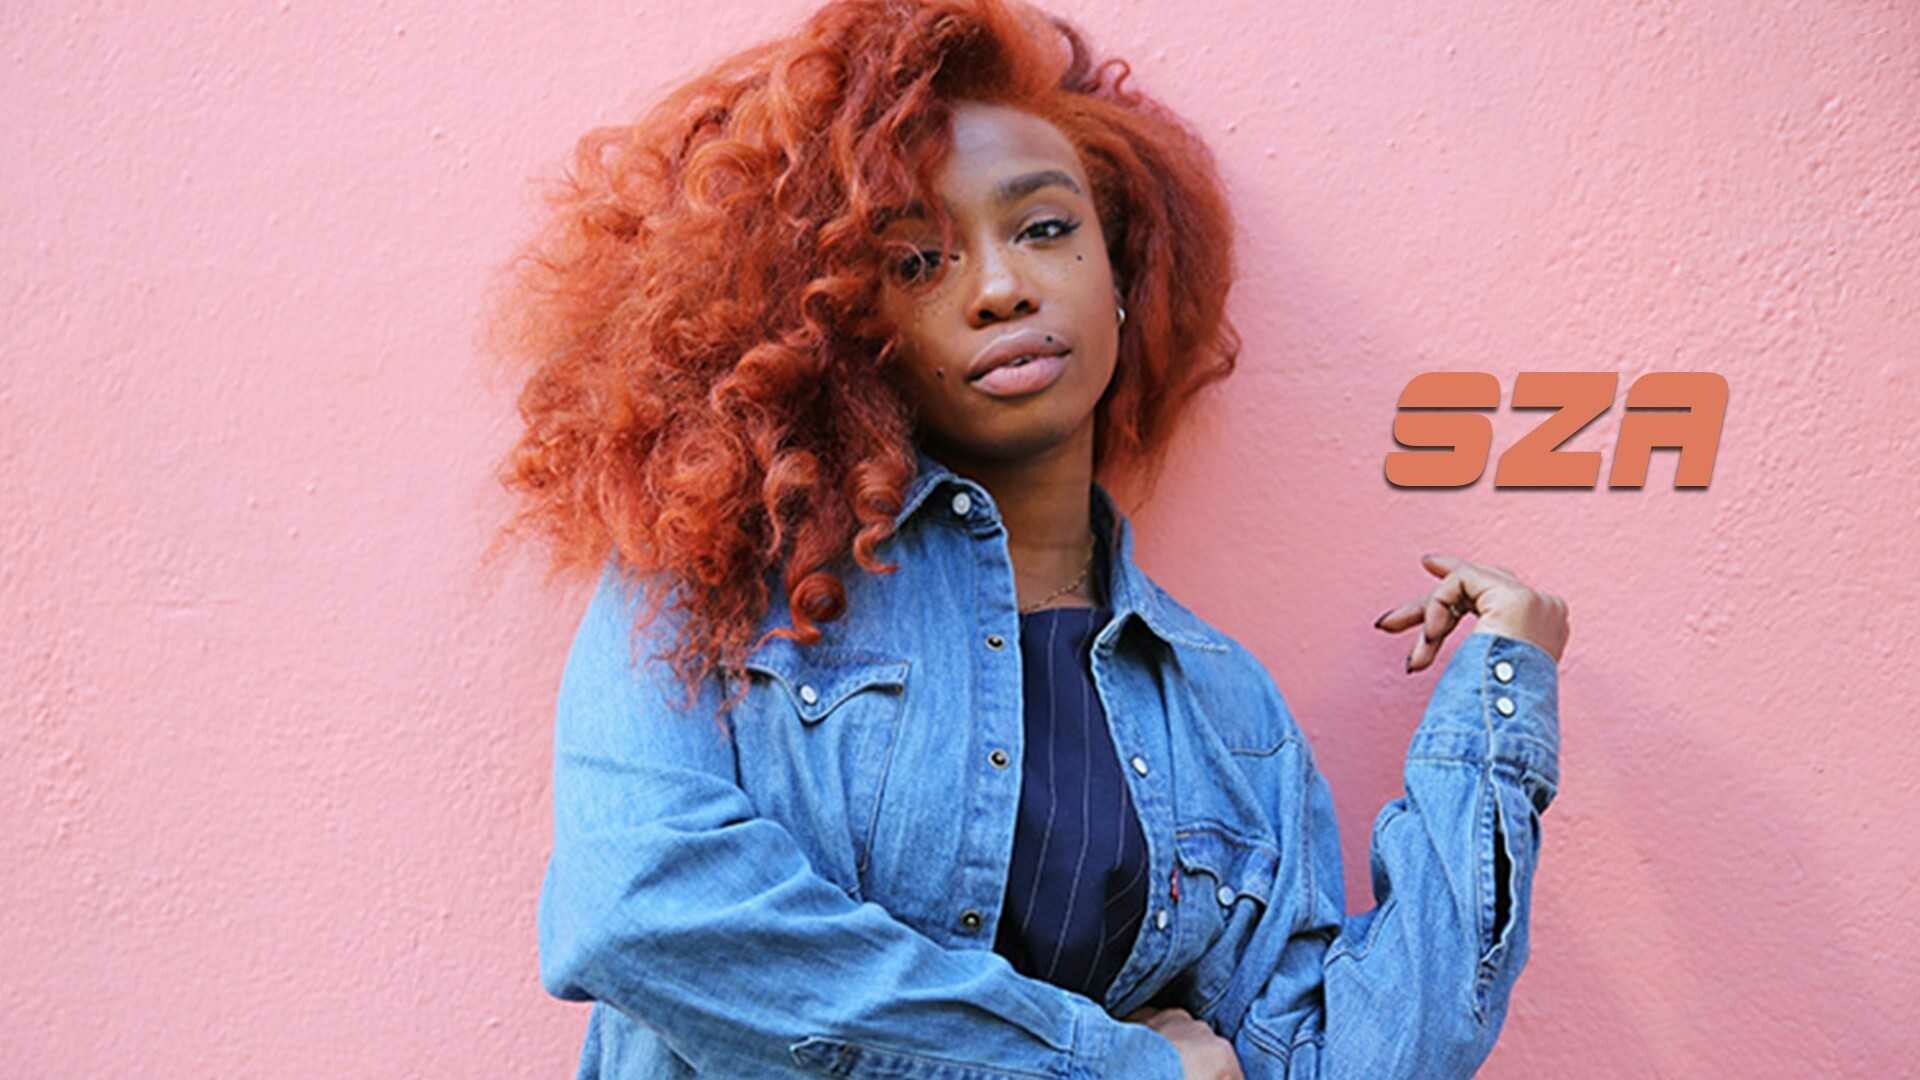 SZA: Her stage name is pronounced "sizz-ah", RnB artist. 1920x1080 Full HD Wallpaper.